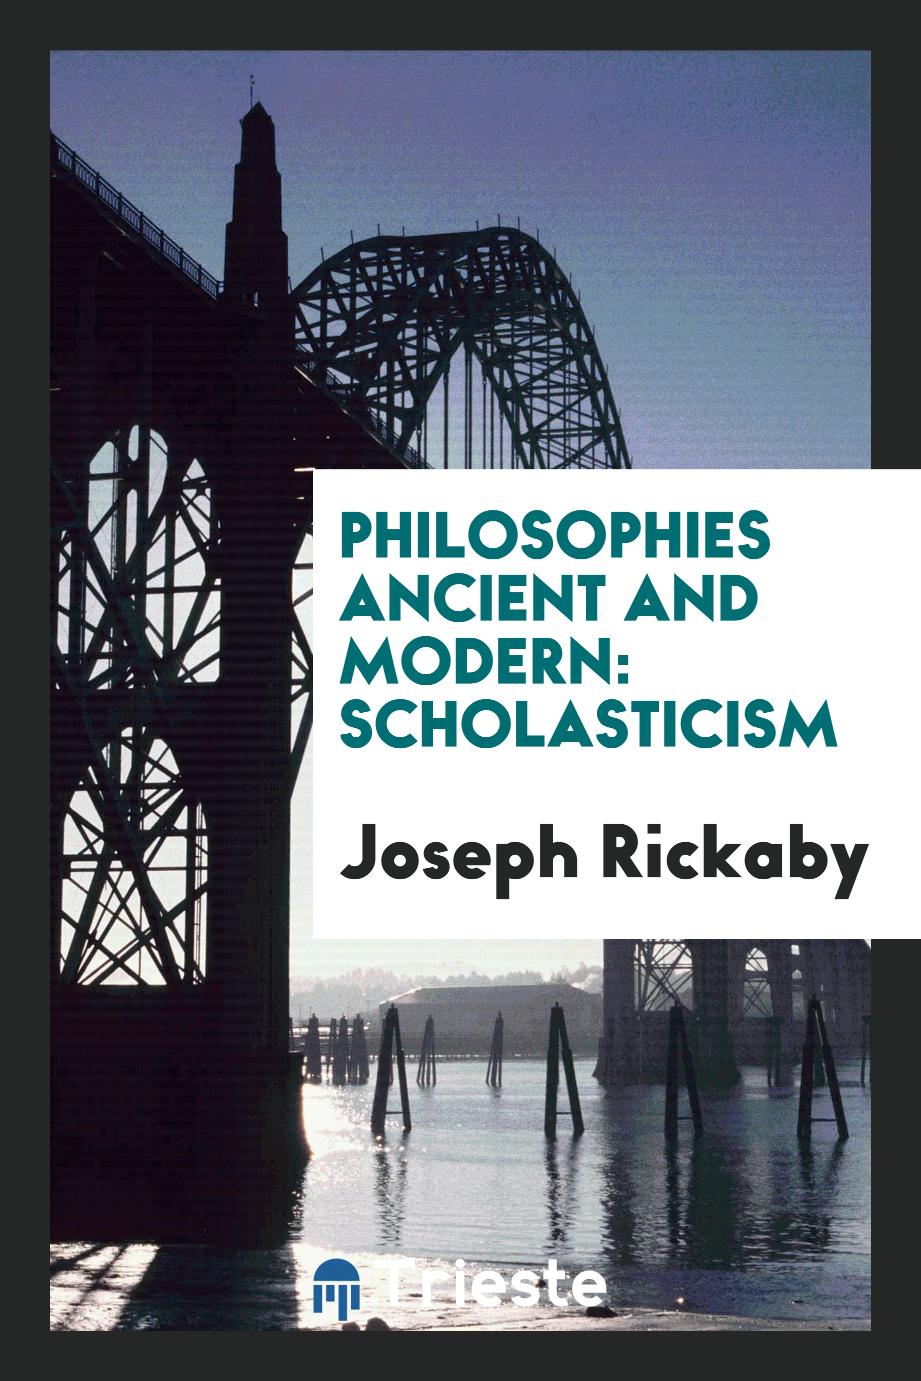 Philosophies Ancient and Modern: Scholasticism